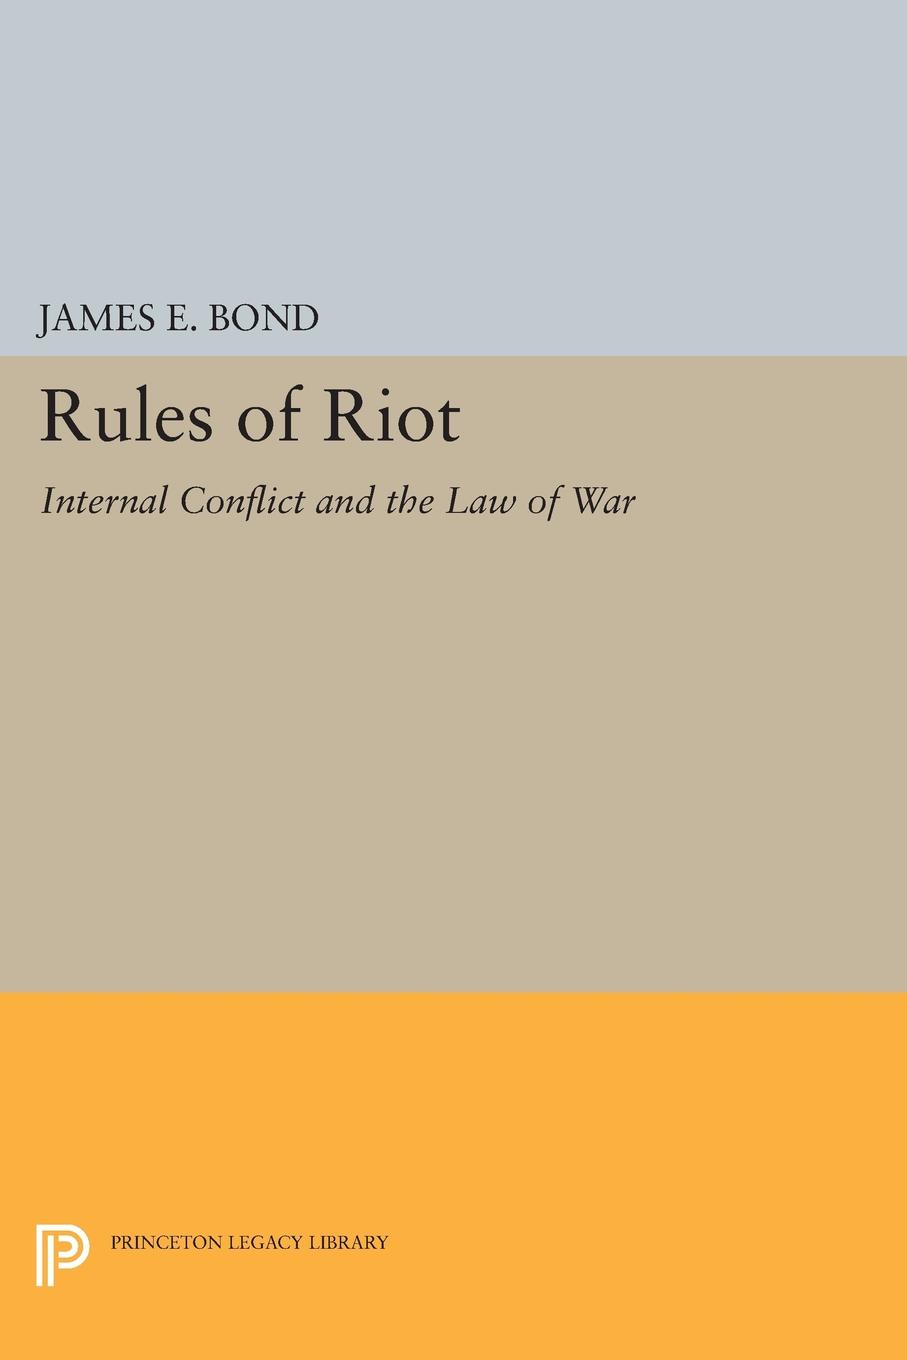 Rules of Riot. Internal Conflict and the Law of War